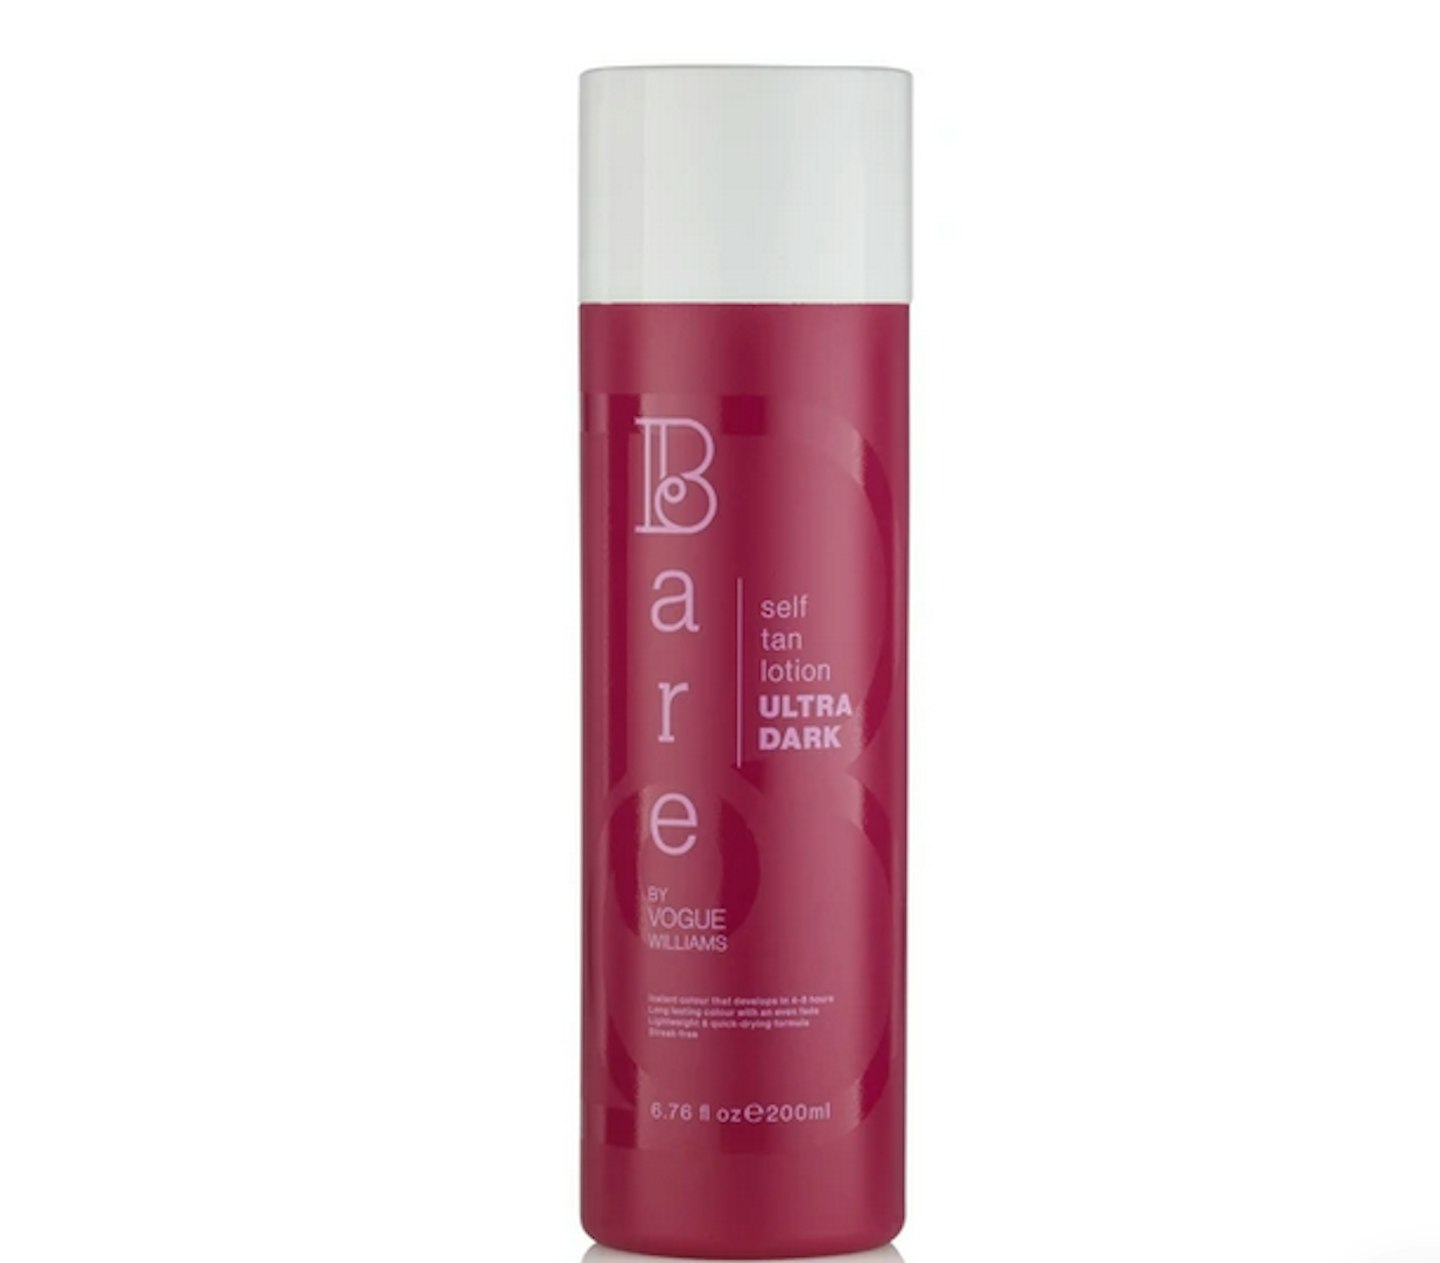 Bare by Vogue Williams Self Tan Lotion, £17.10